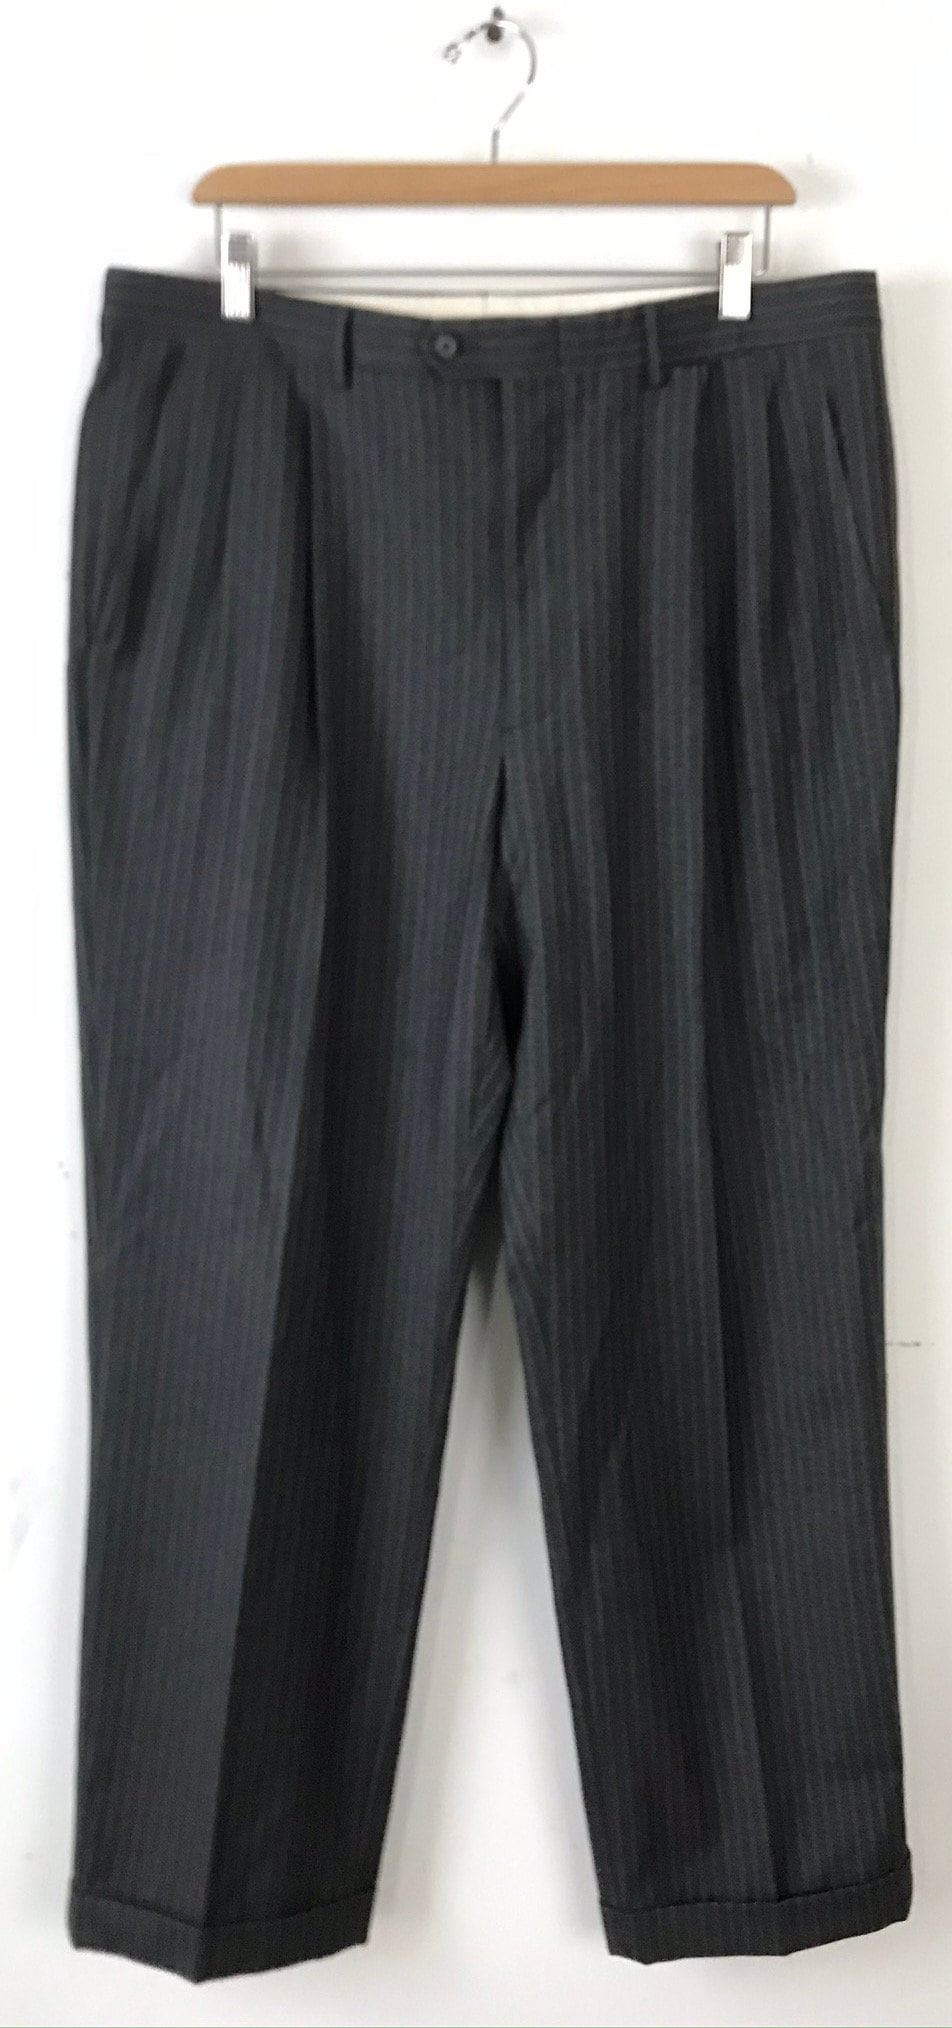 90s Dark Gray Pinstriped Two Piece Suit Mens Size 44L & 36W - Etsy